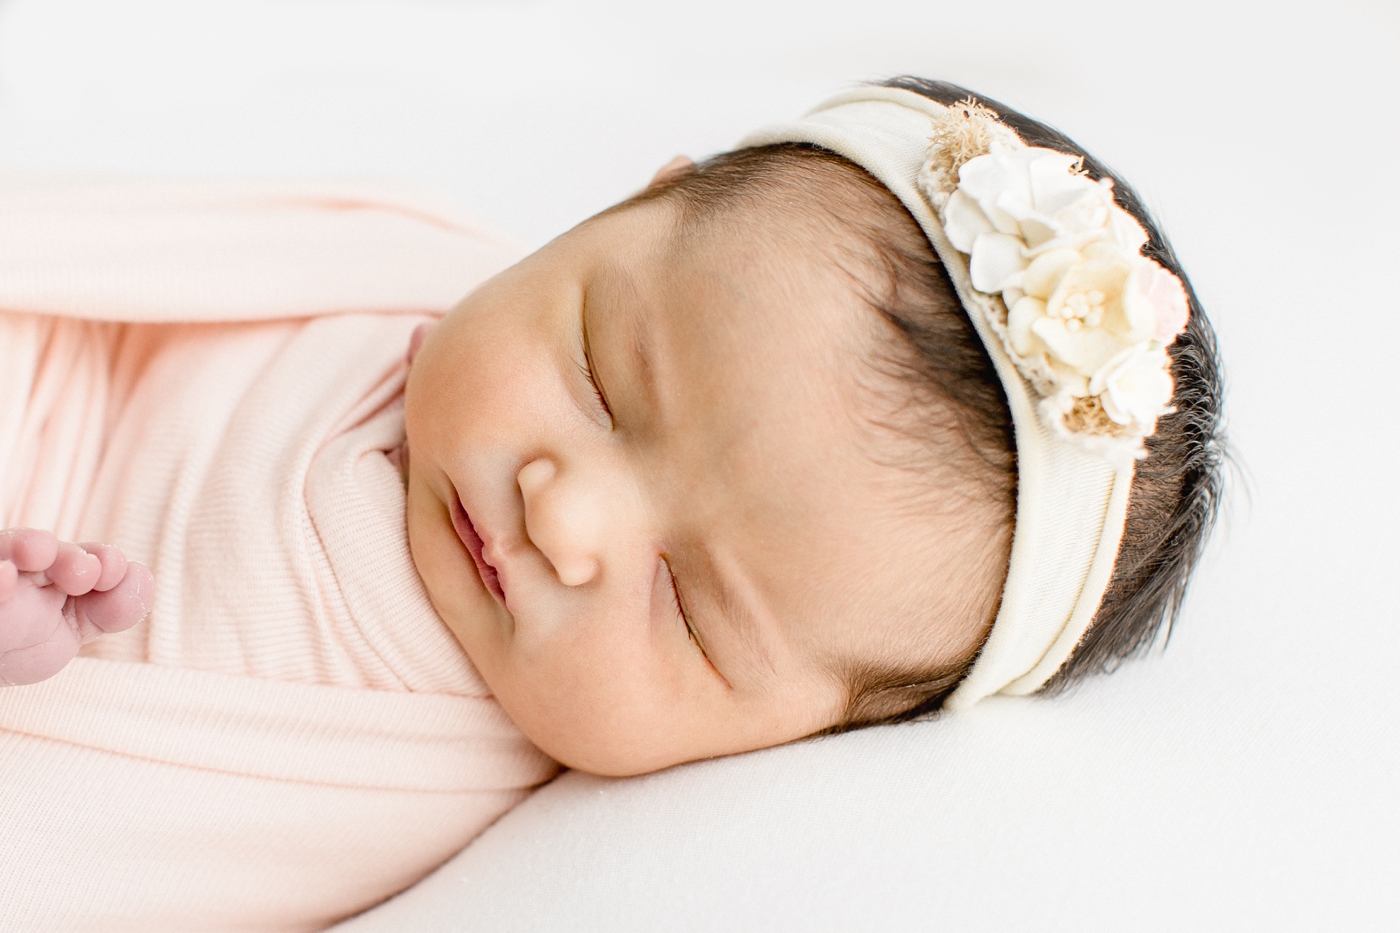 Closeup of baby's facial features while wearing floral headband. Photo by Cedar Park newborn photographer, Sana Ahmed Photography.